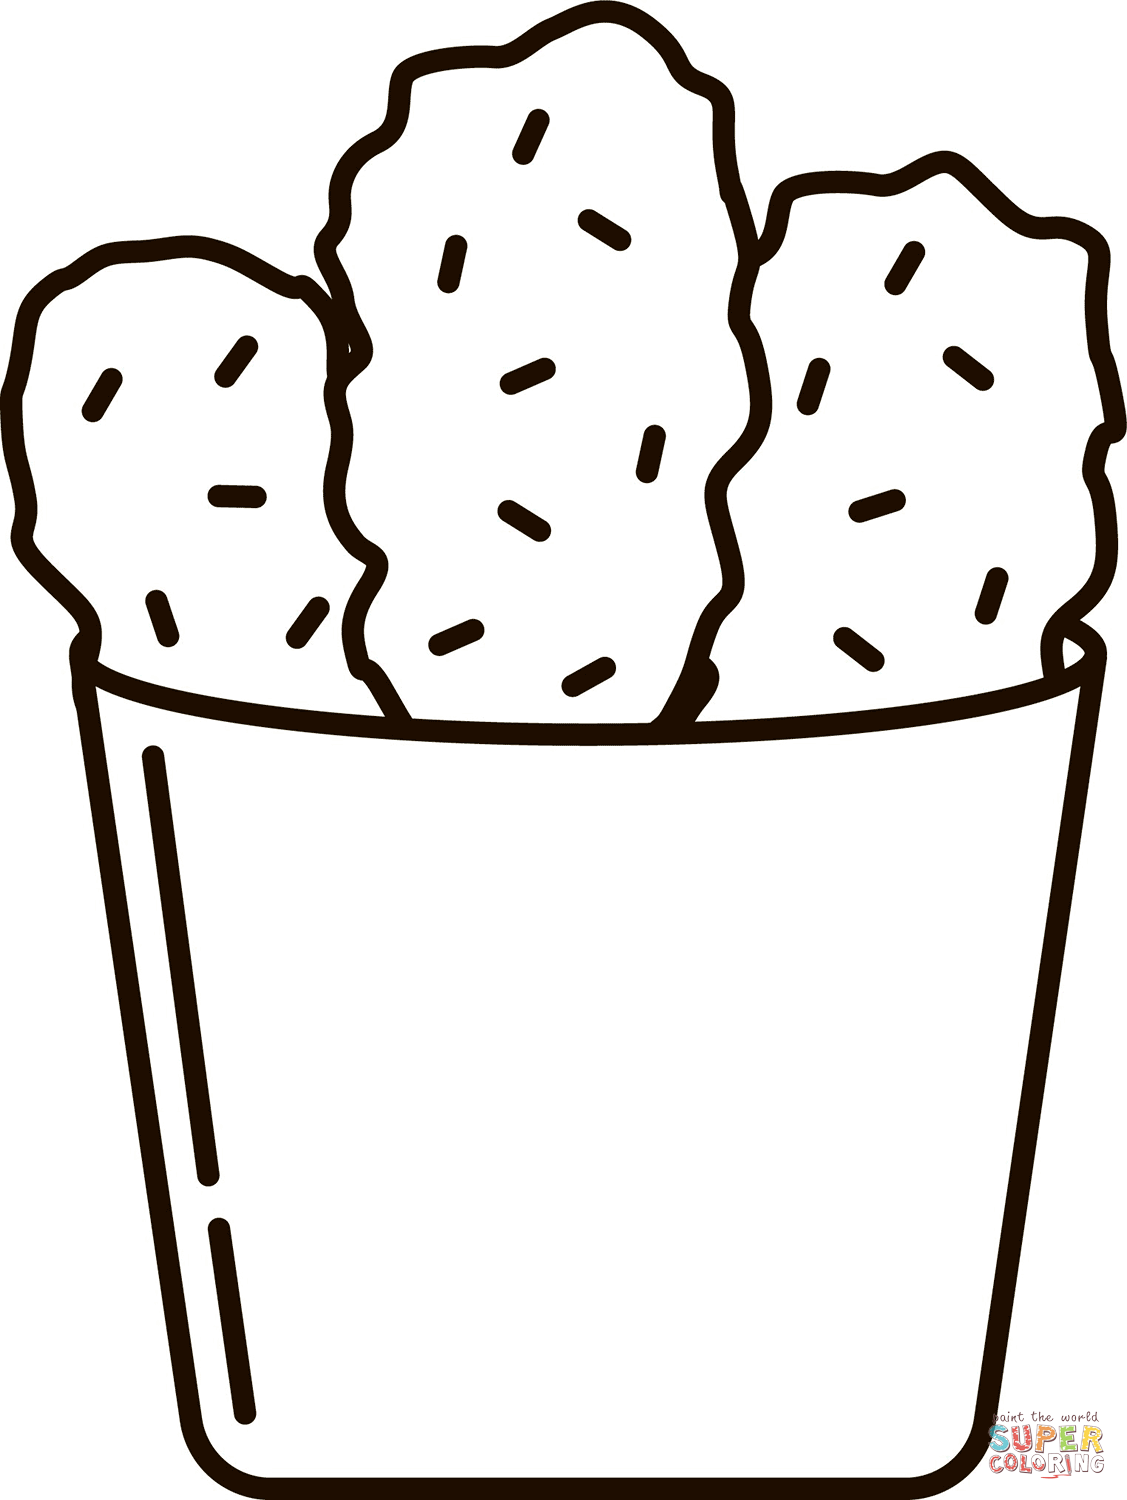 Chicken nuggets coloring page free printable coloring pages